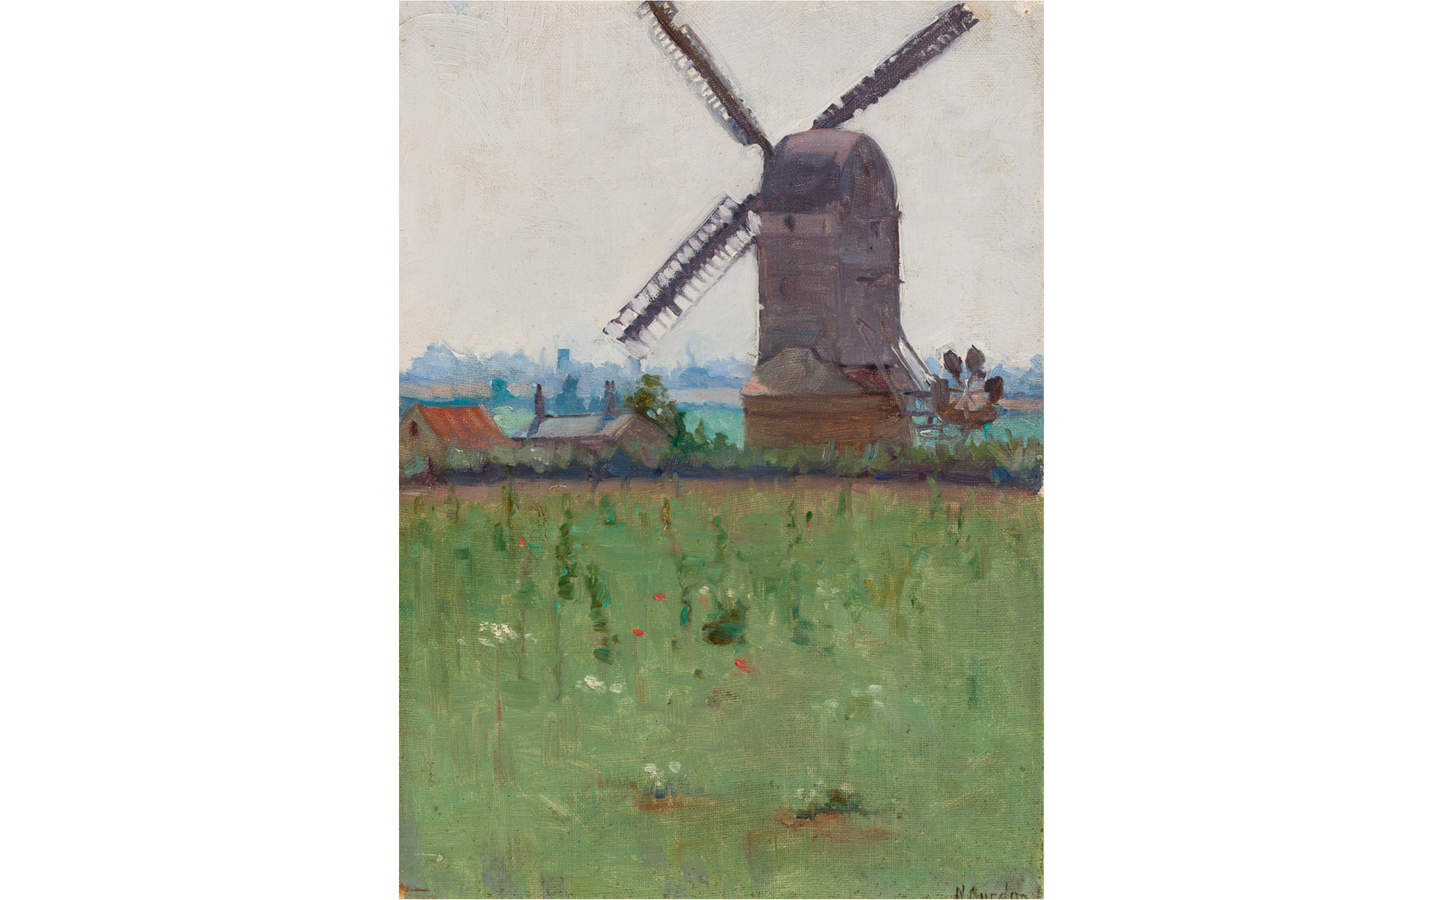 Painting of a traditional looking windmill in a landscape situated next to two farm buildings. The foreground is grass with budding flowers.